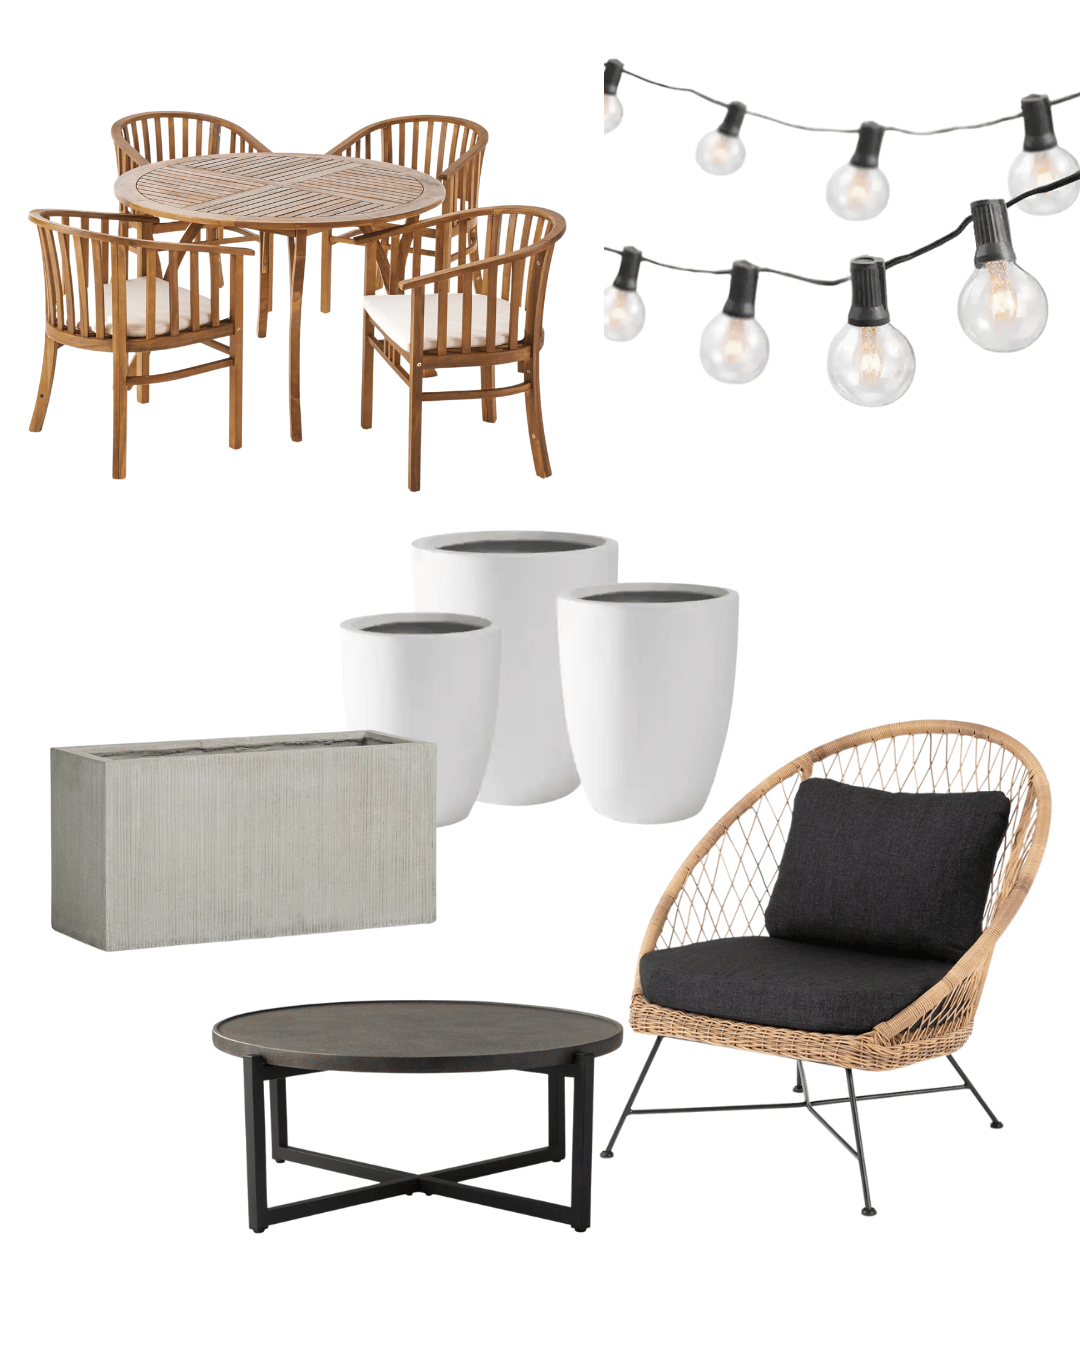 moodboard with outdoor furniture selections